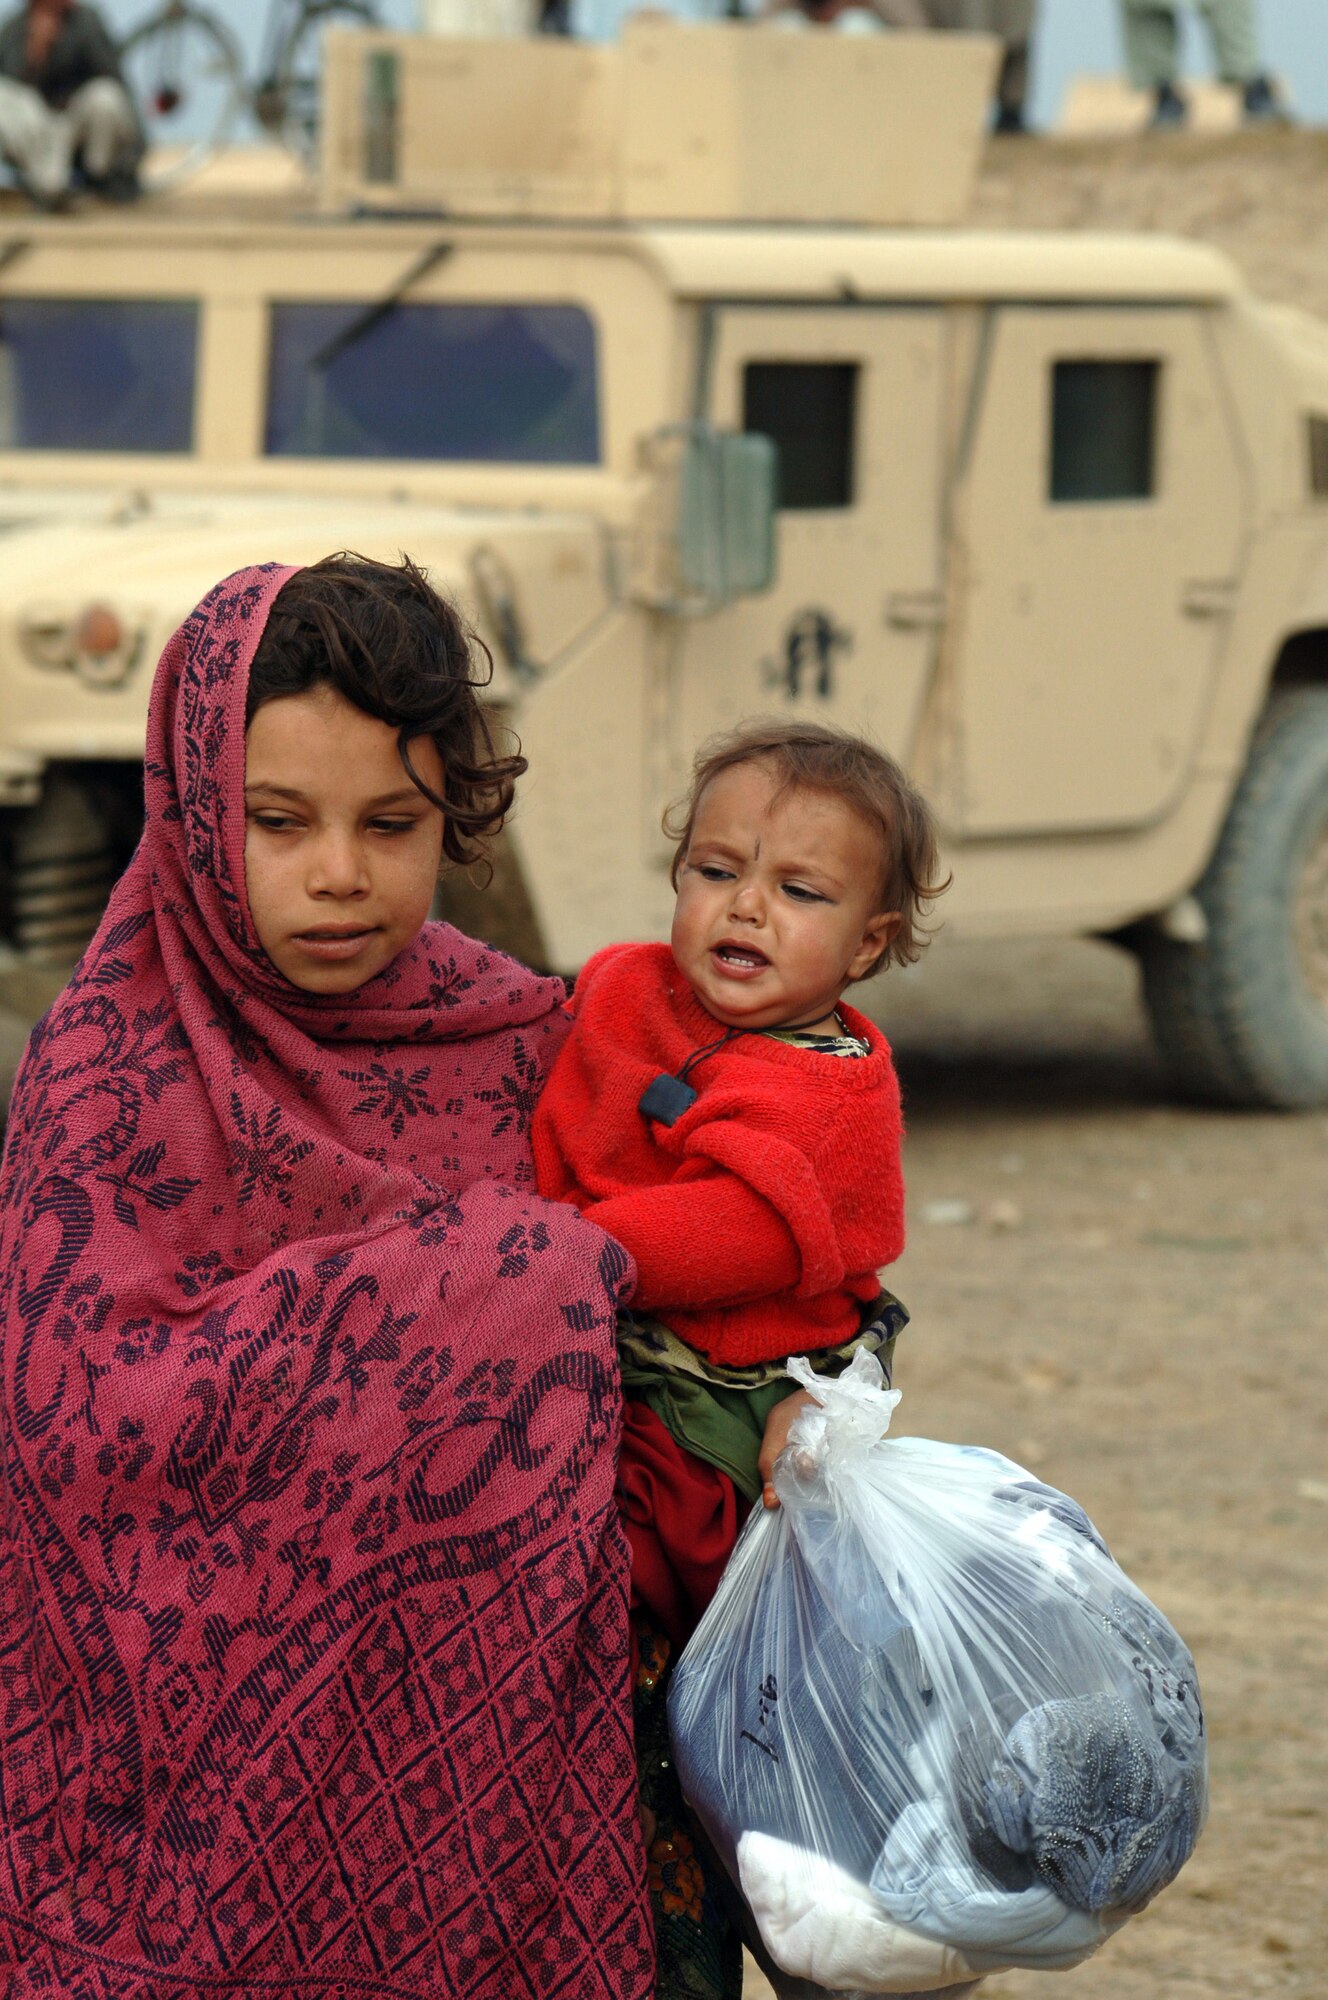 After a rare opportunity of going before men, a young girl carries a bag of clothes to her older sister, who by custom, was not allowed to be photographed. Airmen with the 455th Air Expeditionary Wing recently handed out more than 400 bags of clothes, shoes, school supplies, hygiene items and toys to the residents of the village of Gadia in Parwan Province, Afghanistan. (U.S. Air Force photo/Staff Sgt. Jennifer Redente) 